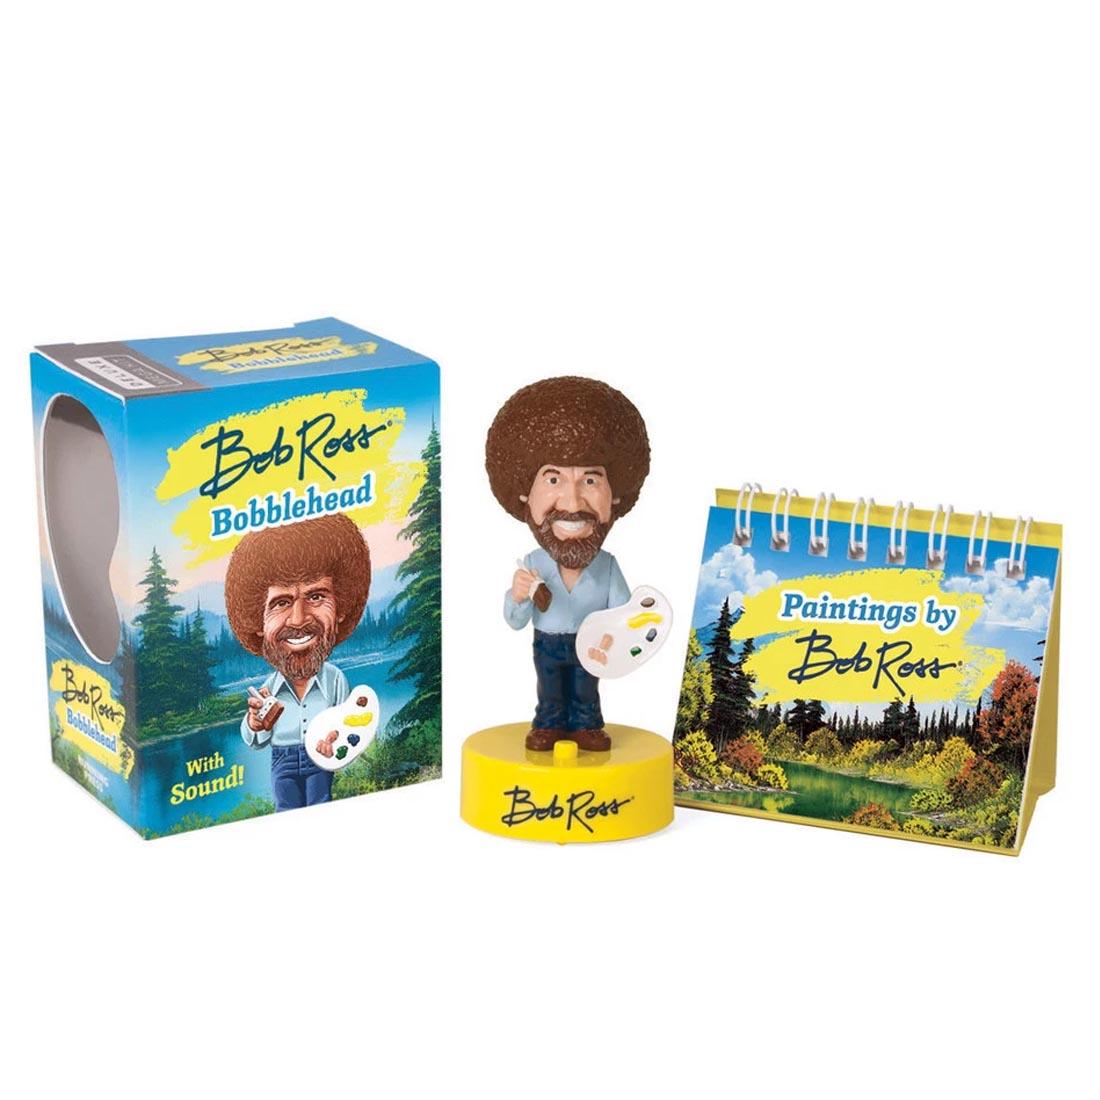 Bob Ross Bobblehead Figurine and Paintings Book